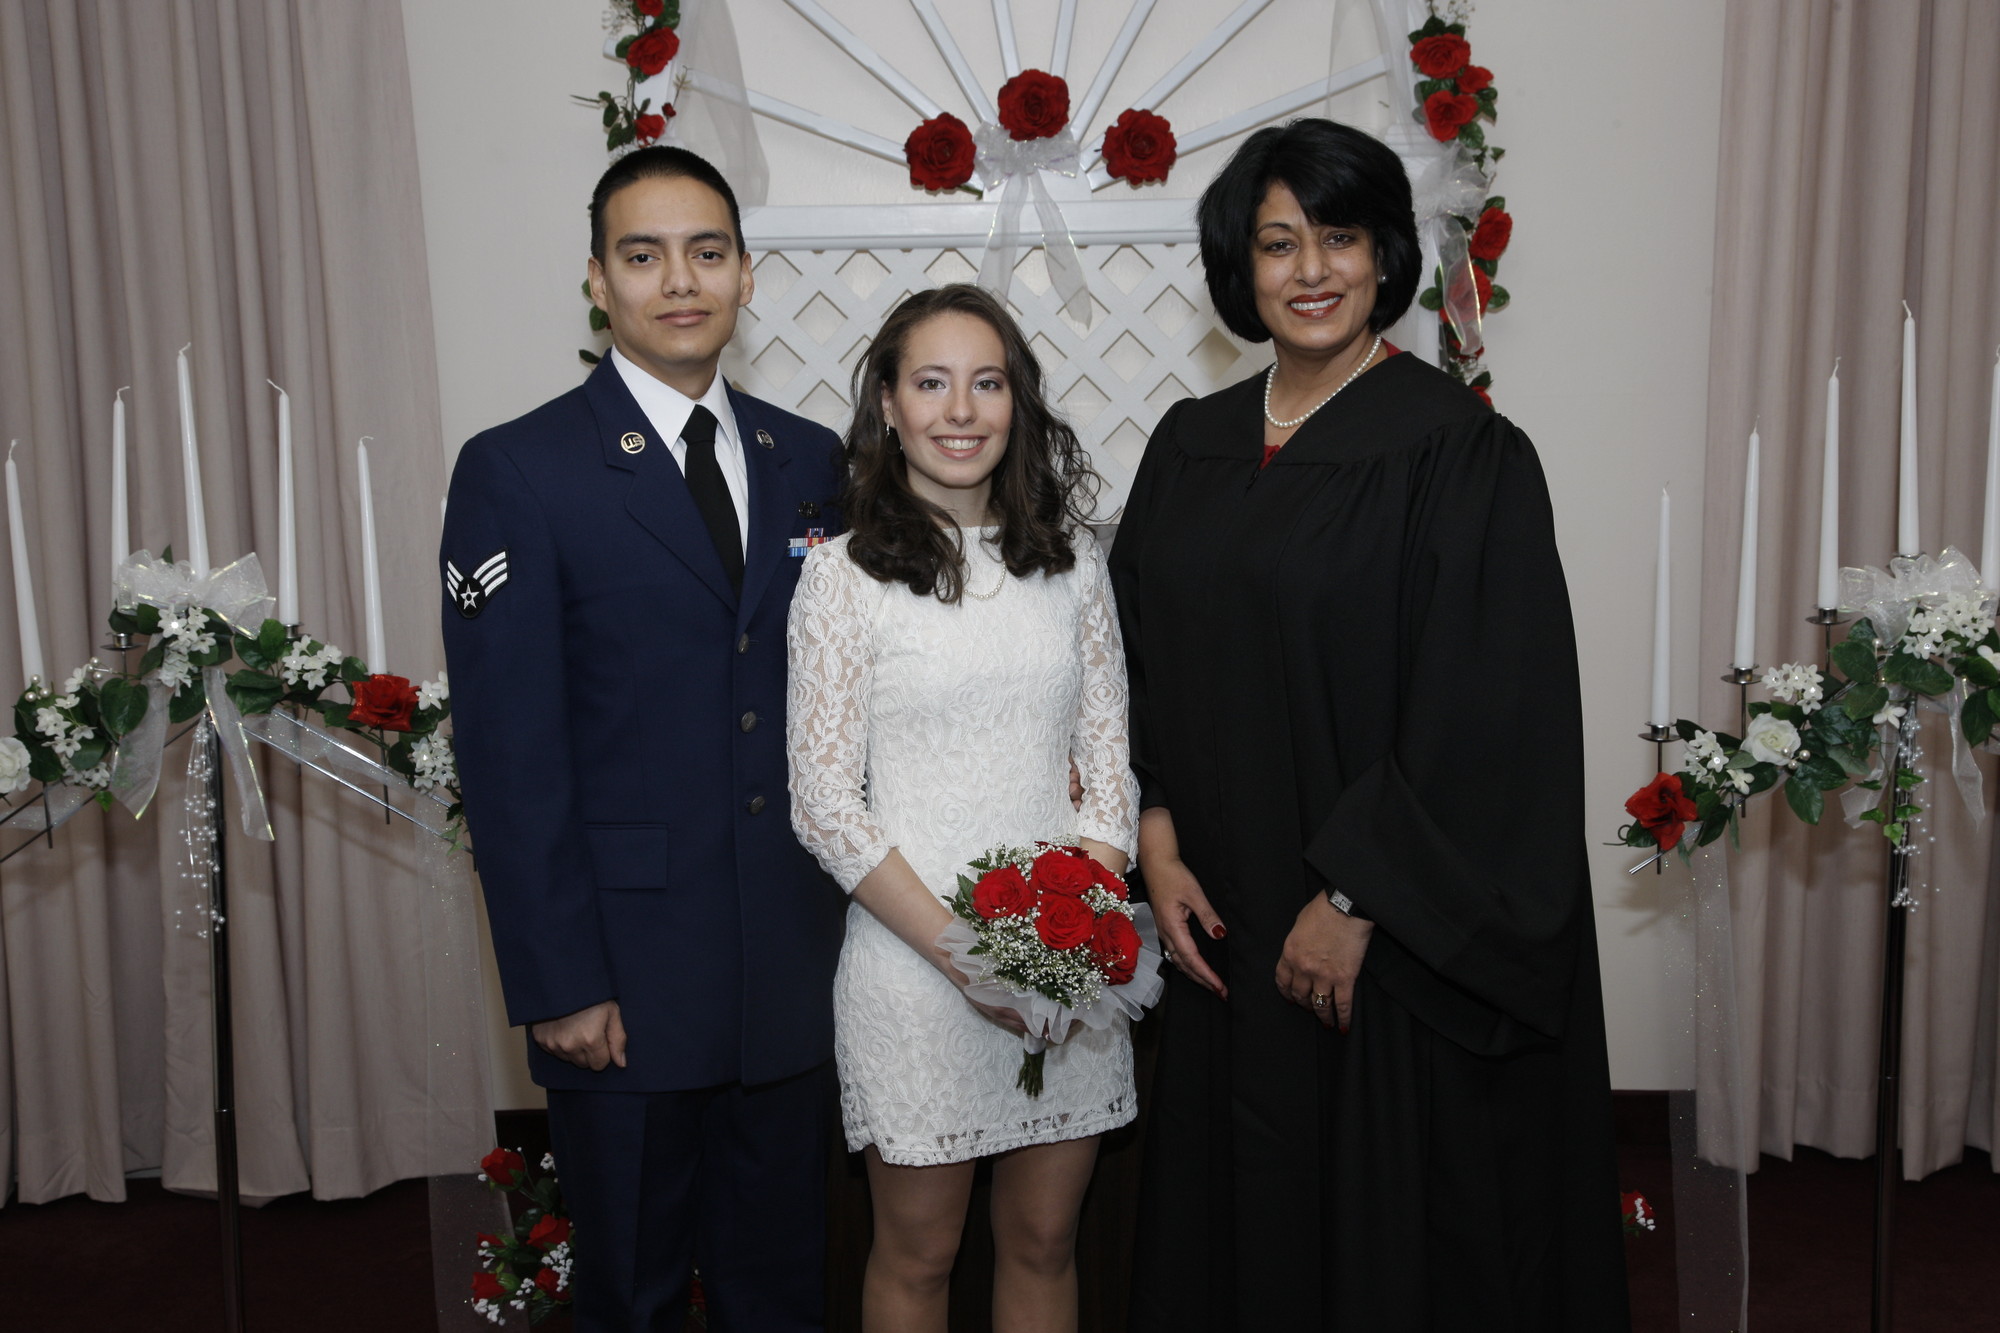 Carlos Jonathon Alarcon and Jessica Francine Marcus, of East Meadow, were married at Town Hall on Valentine’s Day by Town Clerk Nasrin Ahmad.